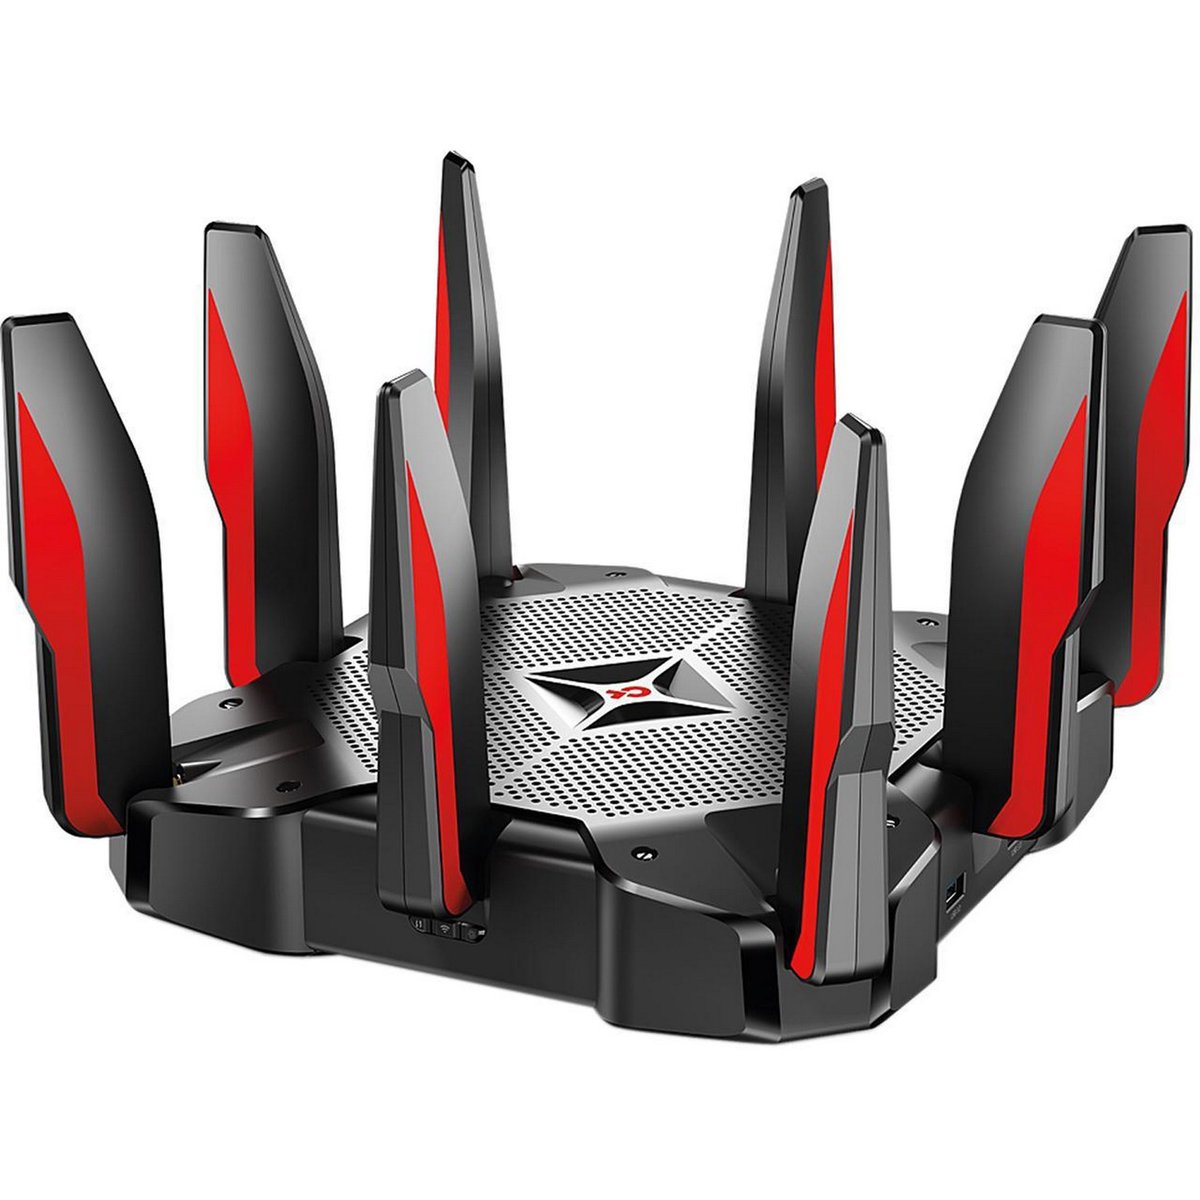 TP-Link AC5400 MU-MIMO Tri-Band Wi-Fi Router with Comprehensive Network for Gaming and Entertainment